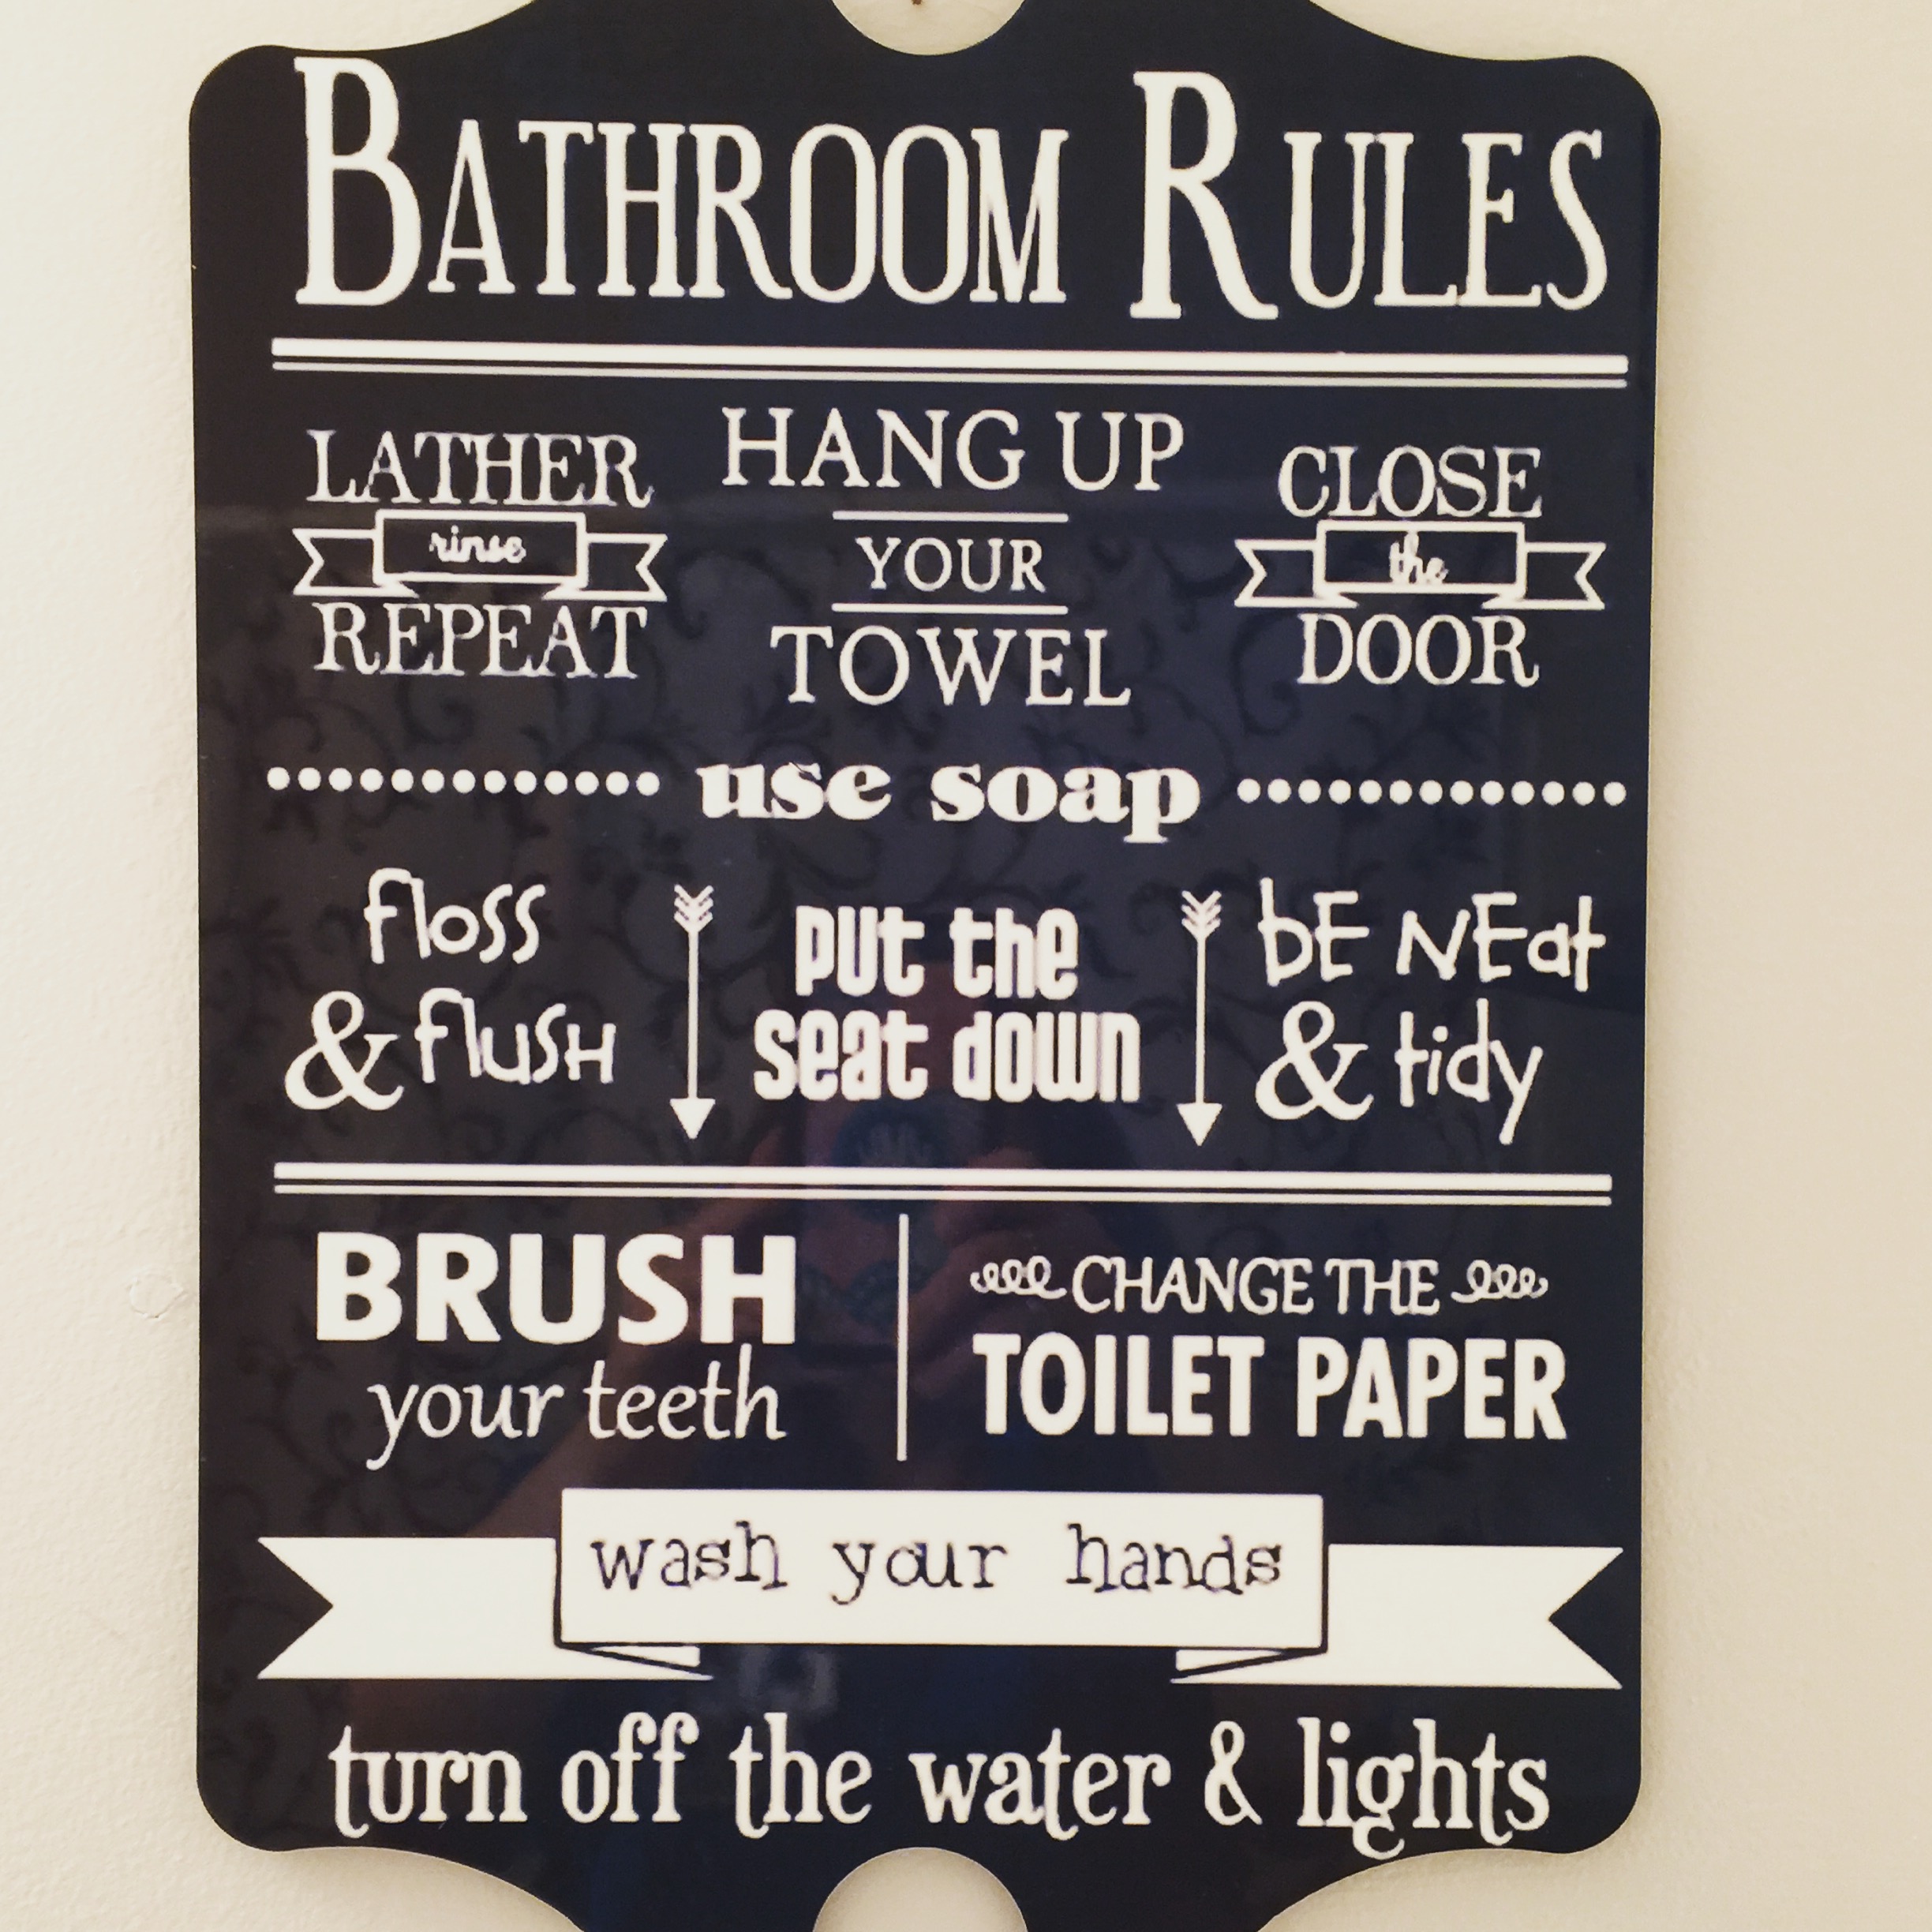 Love this!. I made it for my bathroom and it looks perfect. Just hope everyone can follow the r